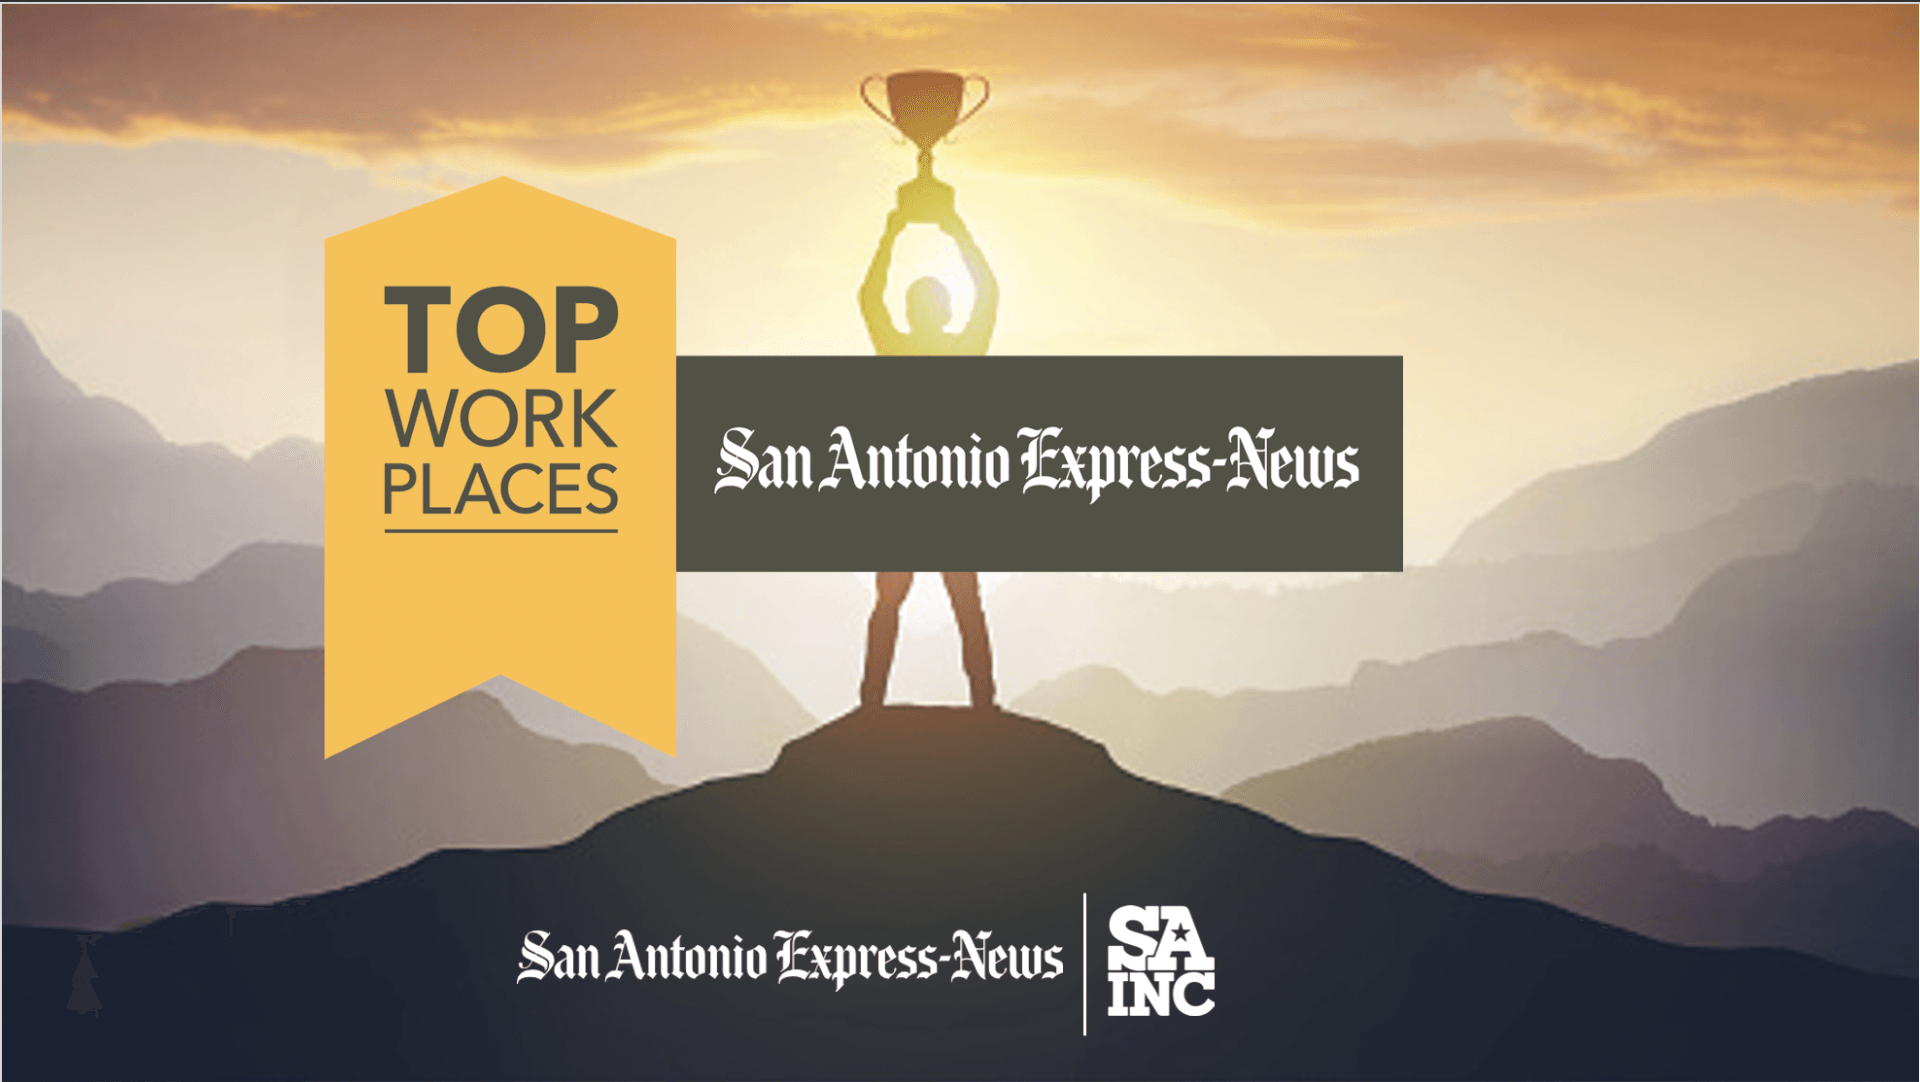 Top places to work